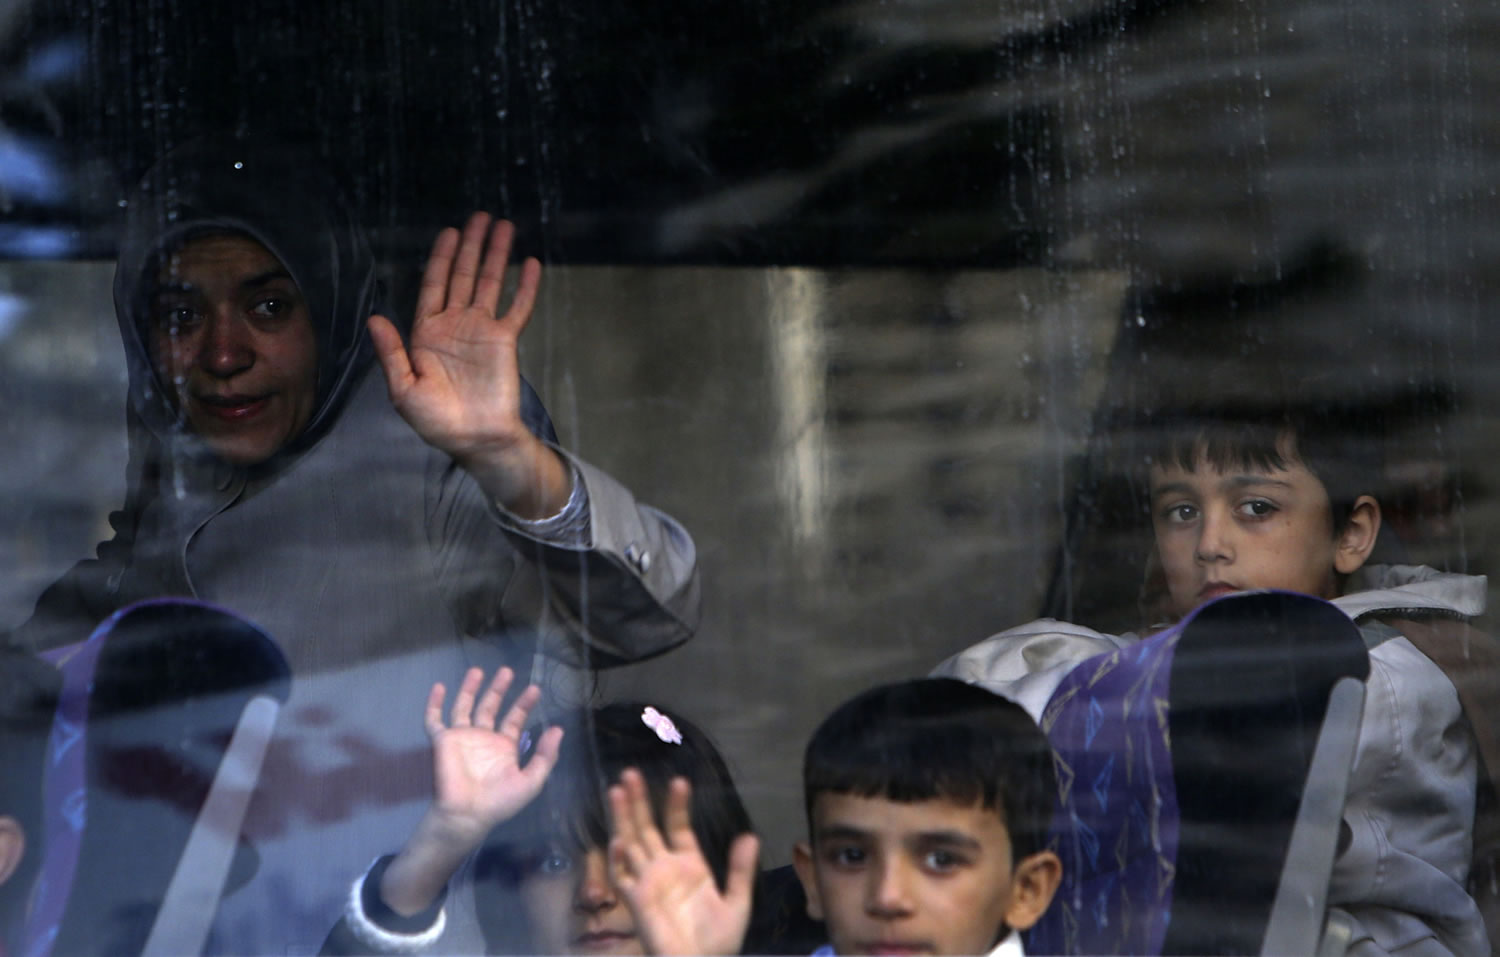 A Syrian refugee family waves to relatives after boarding a bus to Beirut International Airport for a flight to Germany where they have been accepted for temporary resettlement, at the International Organization for Migration office in Beirut, Lebanon on Thursday.